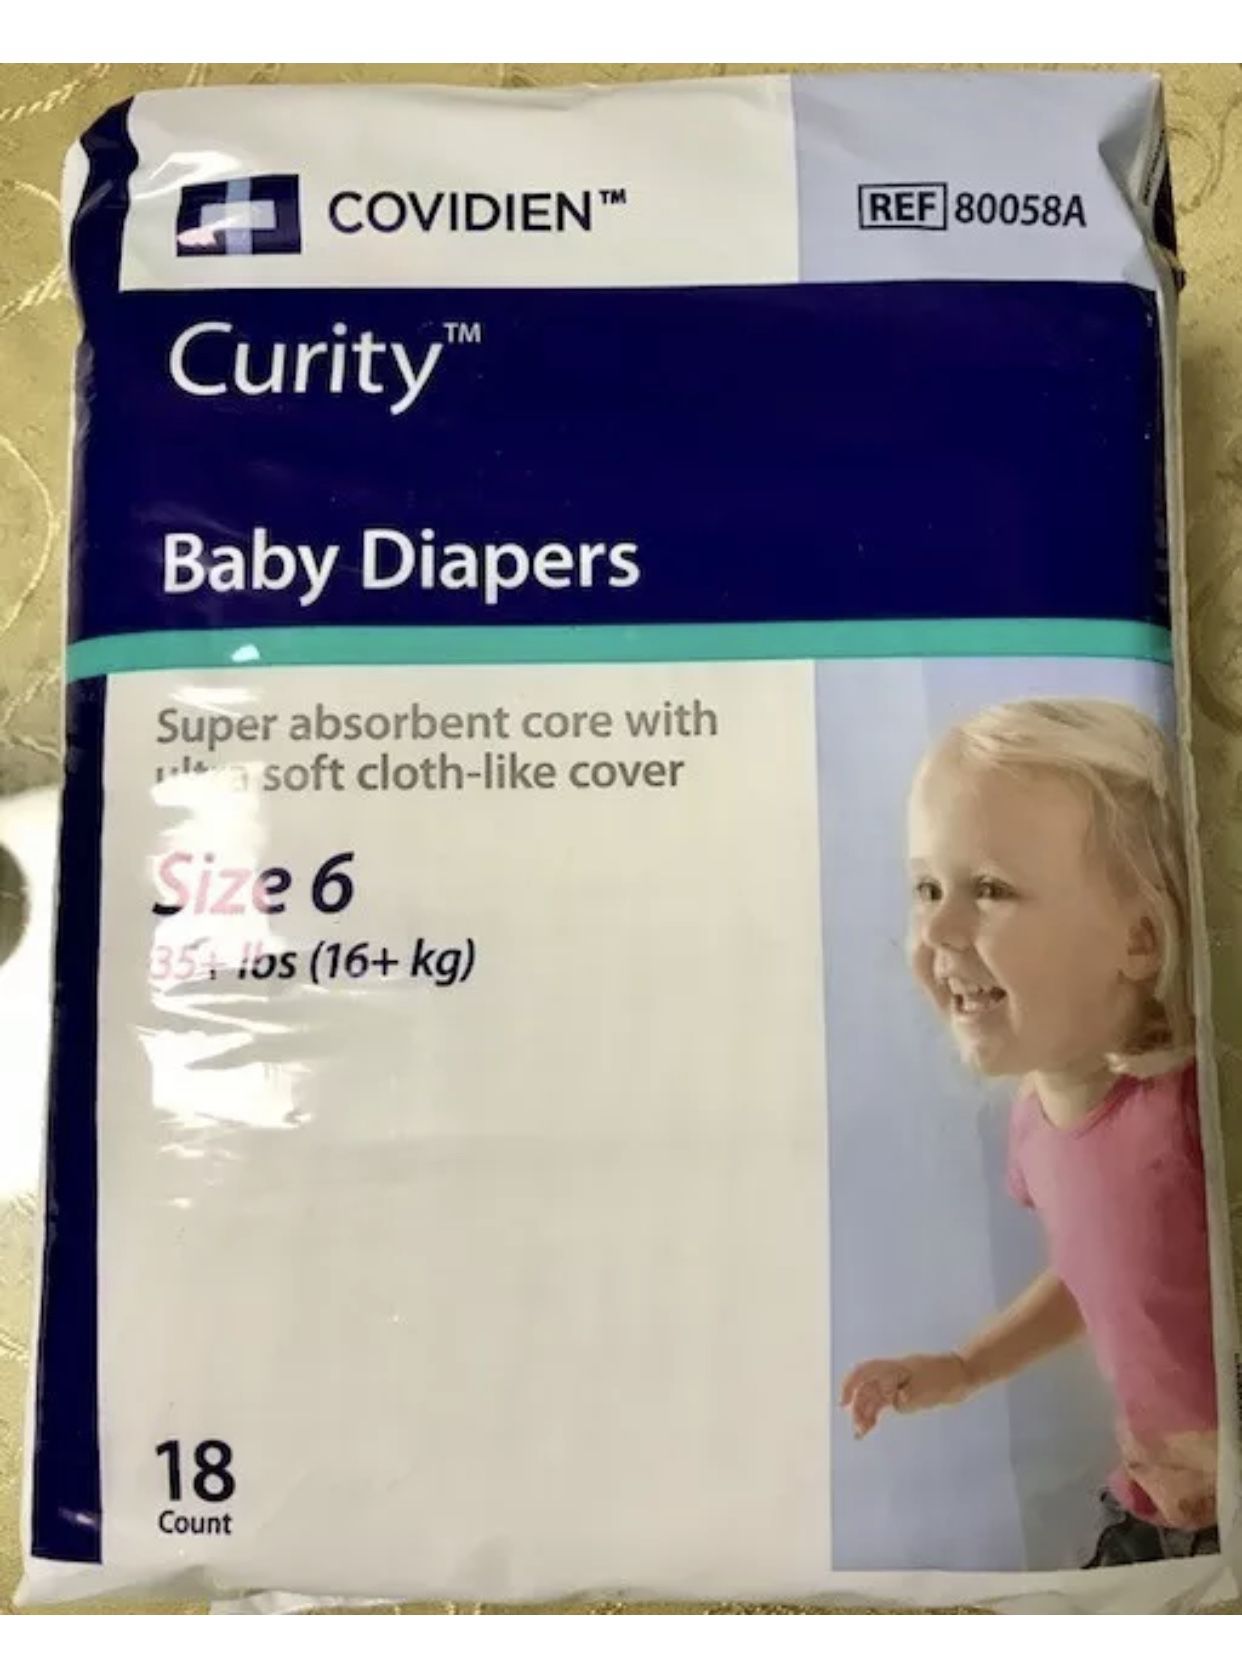 Covidien Curity Baby Diapers - Size 6 (35+ lbs - 16+ Kg.) (Case of 144)